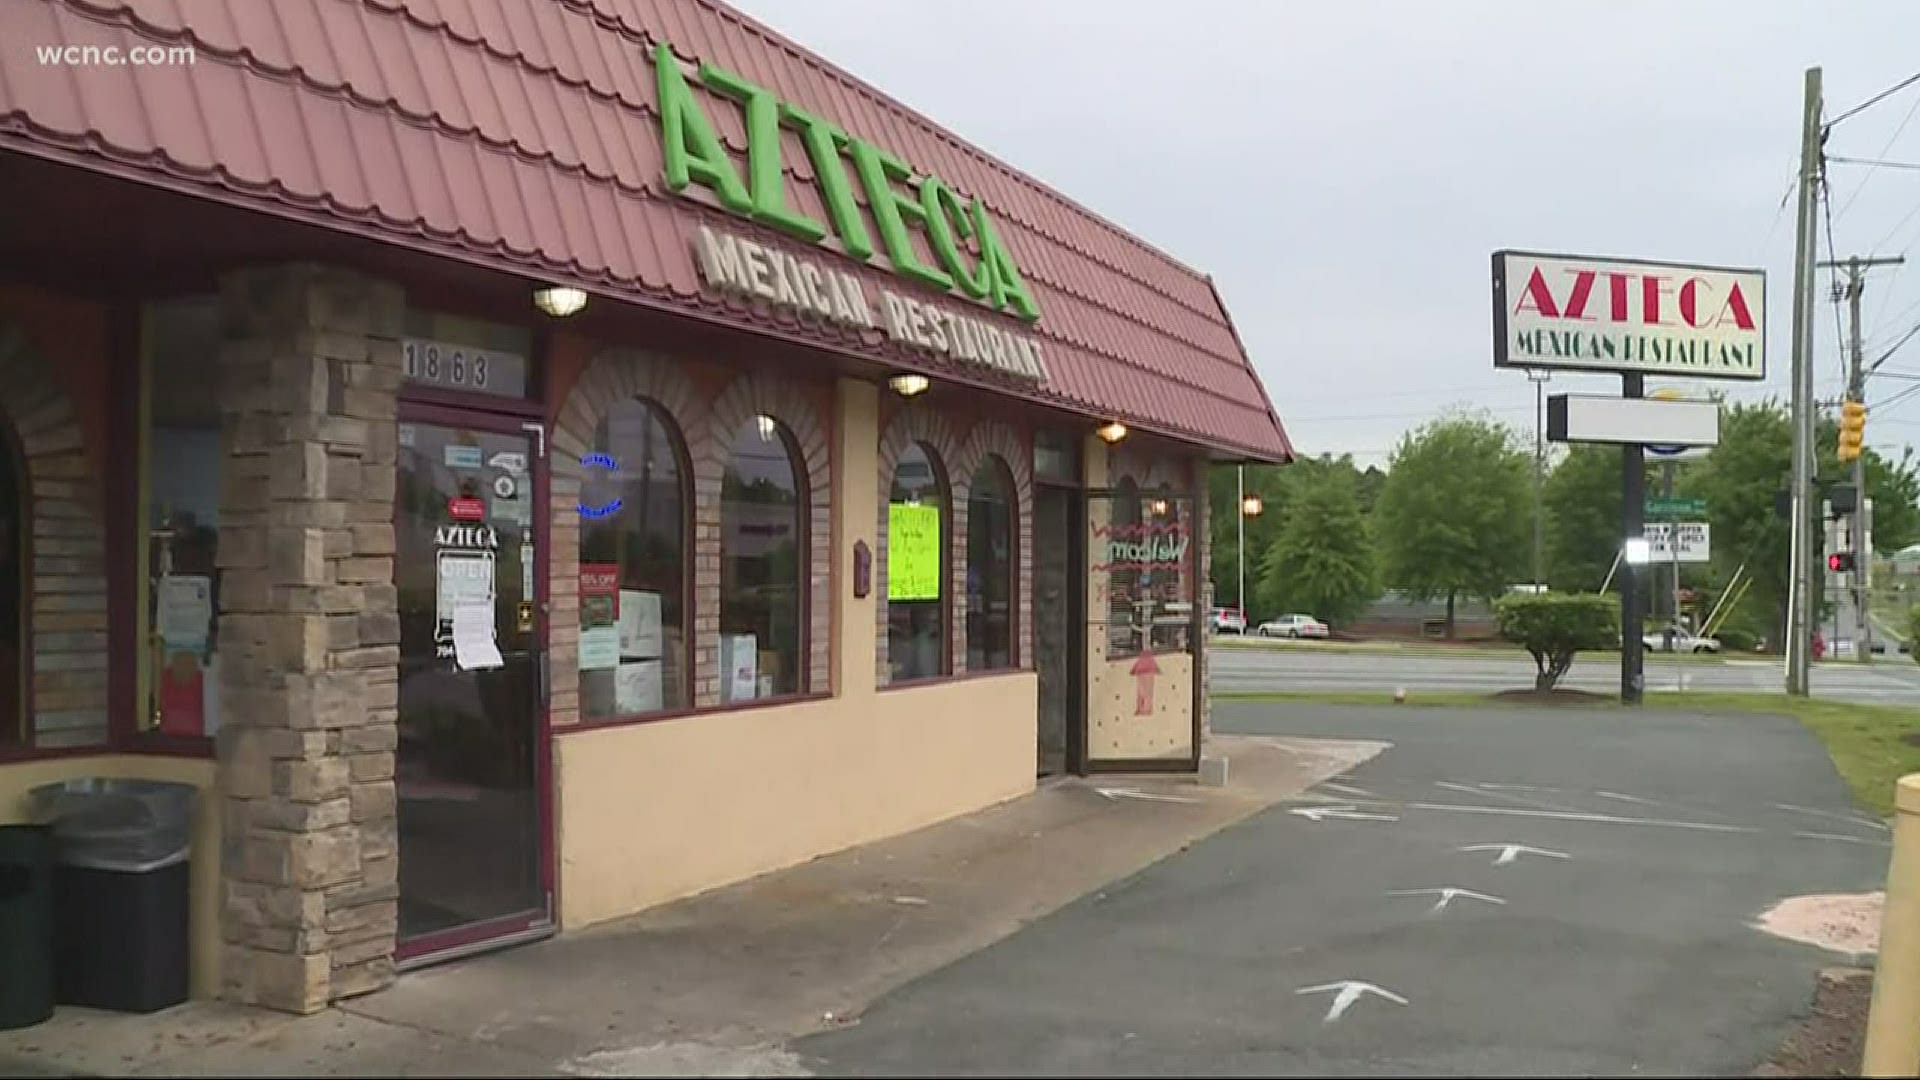 For a few hours, Gaston County business owners thought they were allowed to reopen. Shortly after, they realized that would be breaking the state Stay At Home order.